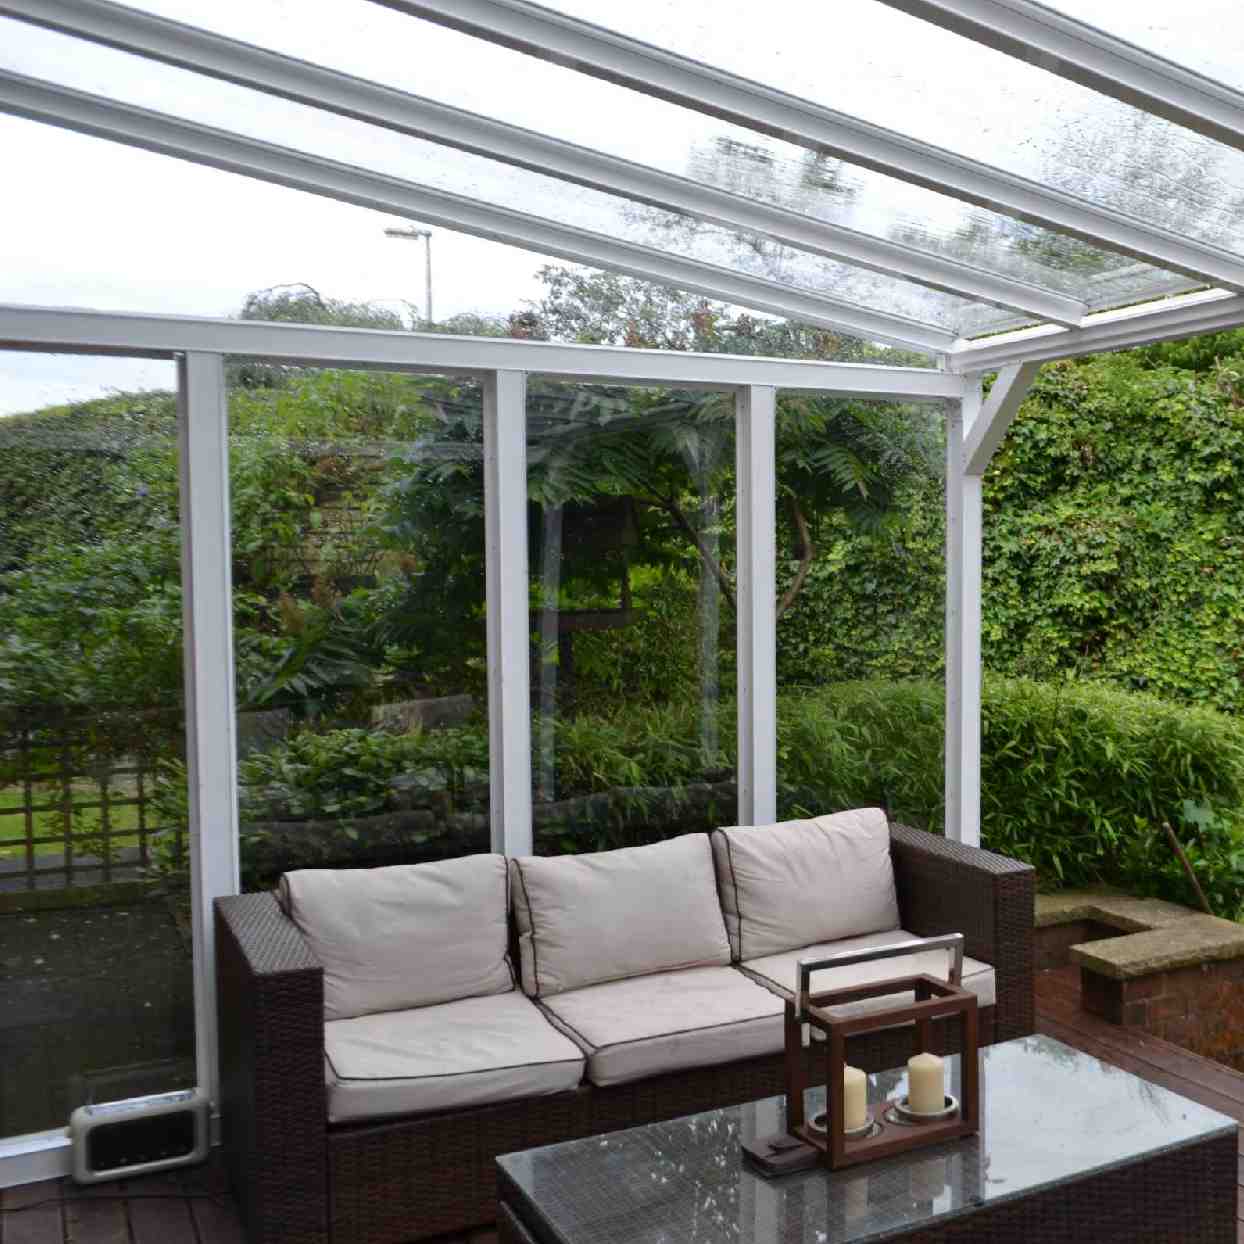 Buy Omega Verandah White with 16mm Polycarbonate Glazing - 4.8m (W) x 4.5m (P), (3) Supporting Posts online today